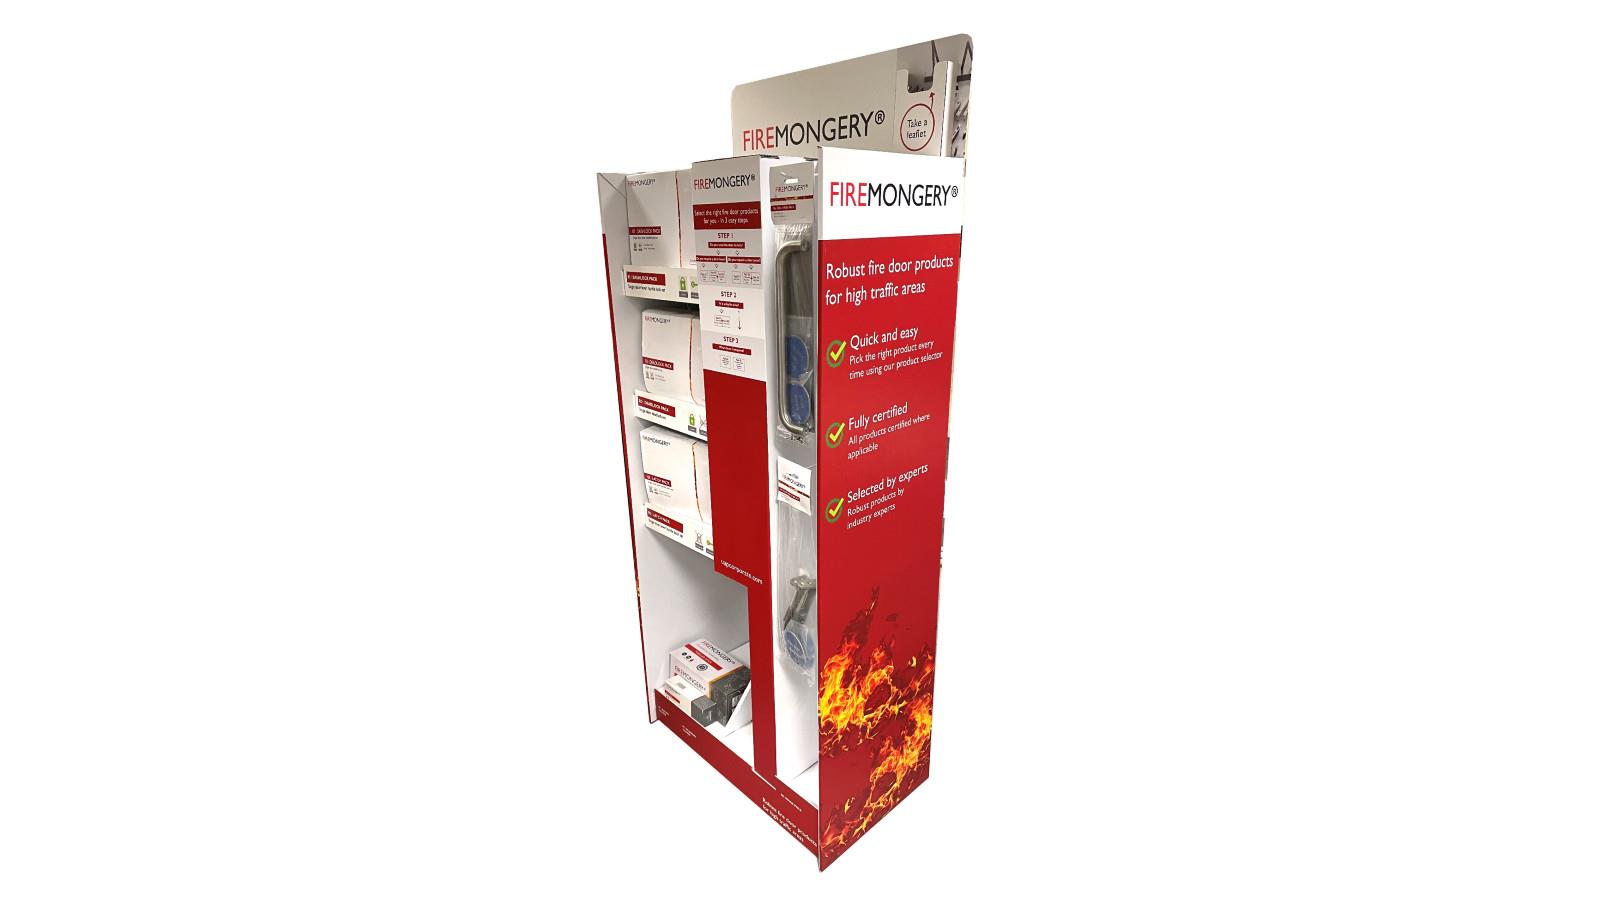 UAP LTD takes the risk out of selecting fire-rated ironmongery with new firemongery range and POS image